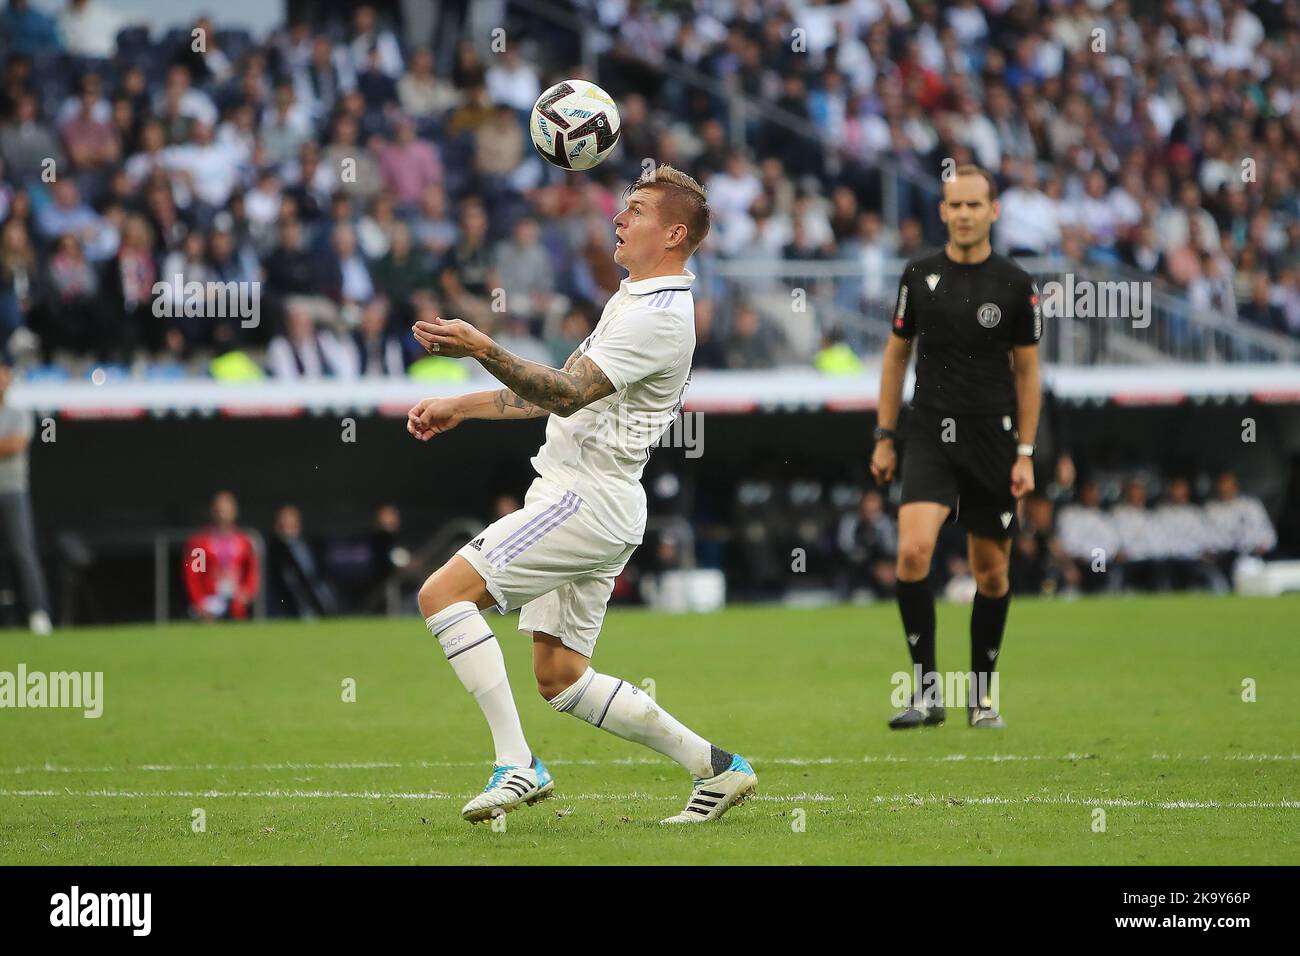 Madrid, Spain, on October 30, 2022. Real Madrid´s Toni Kroos in action during La Liga Match Day 12 between Real Madrid C.F. and Girona at Santiago Bernabeu Stadium in Madrid, Spain, on October 30, 2022 Credit: Edward F. Peters/Alamy Live News Stock Photo